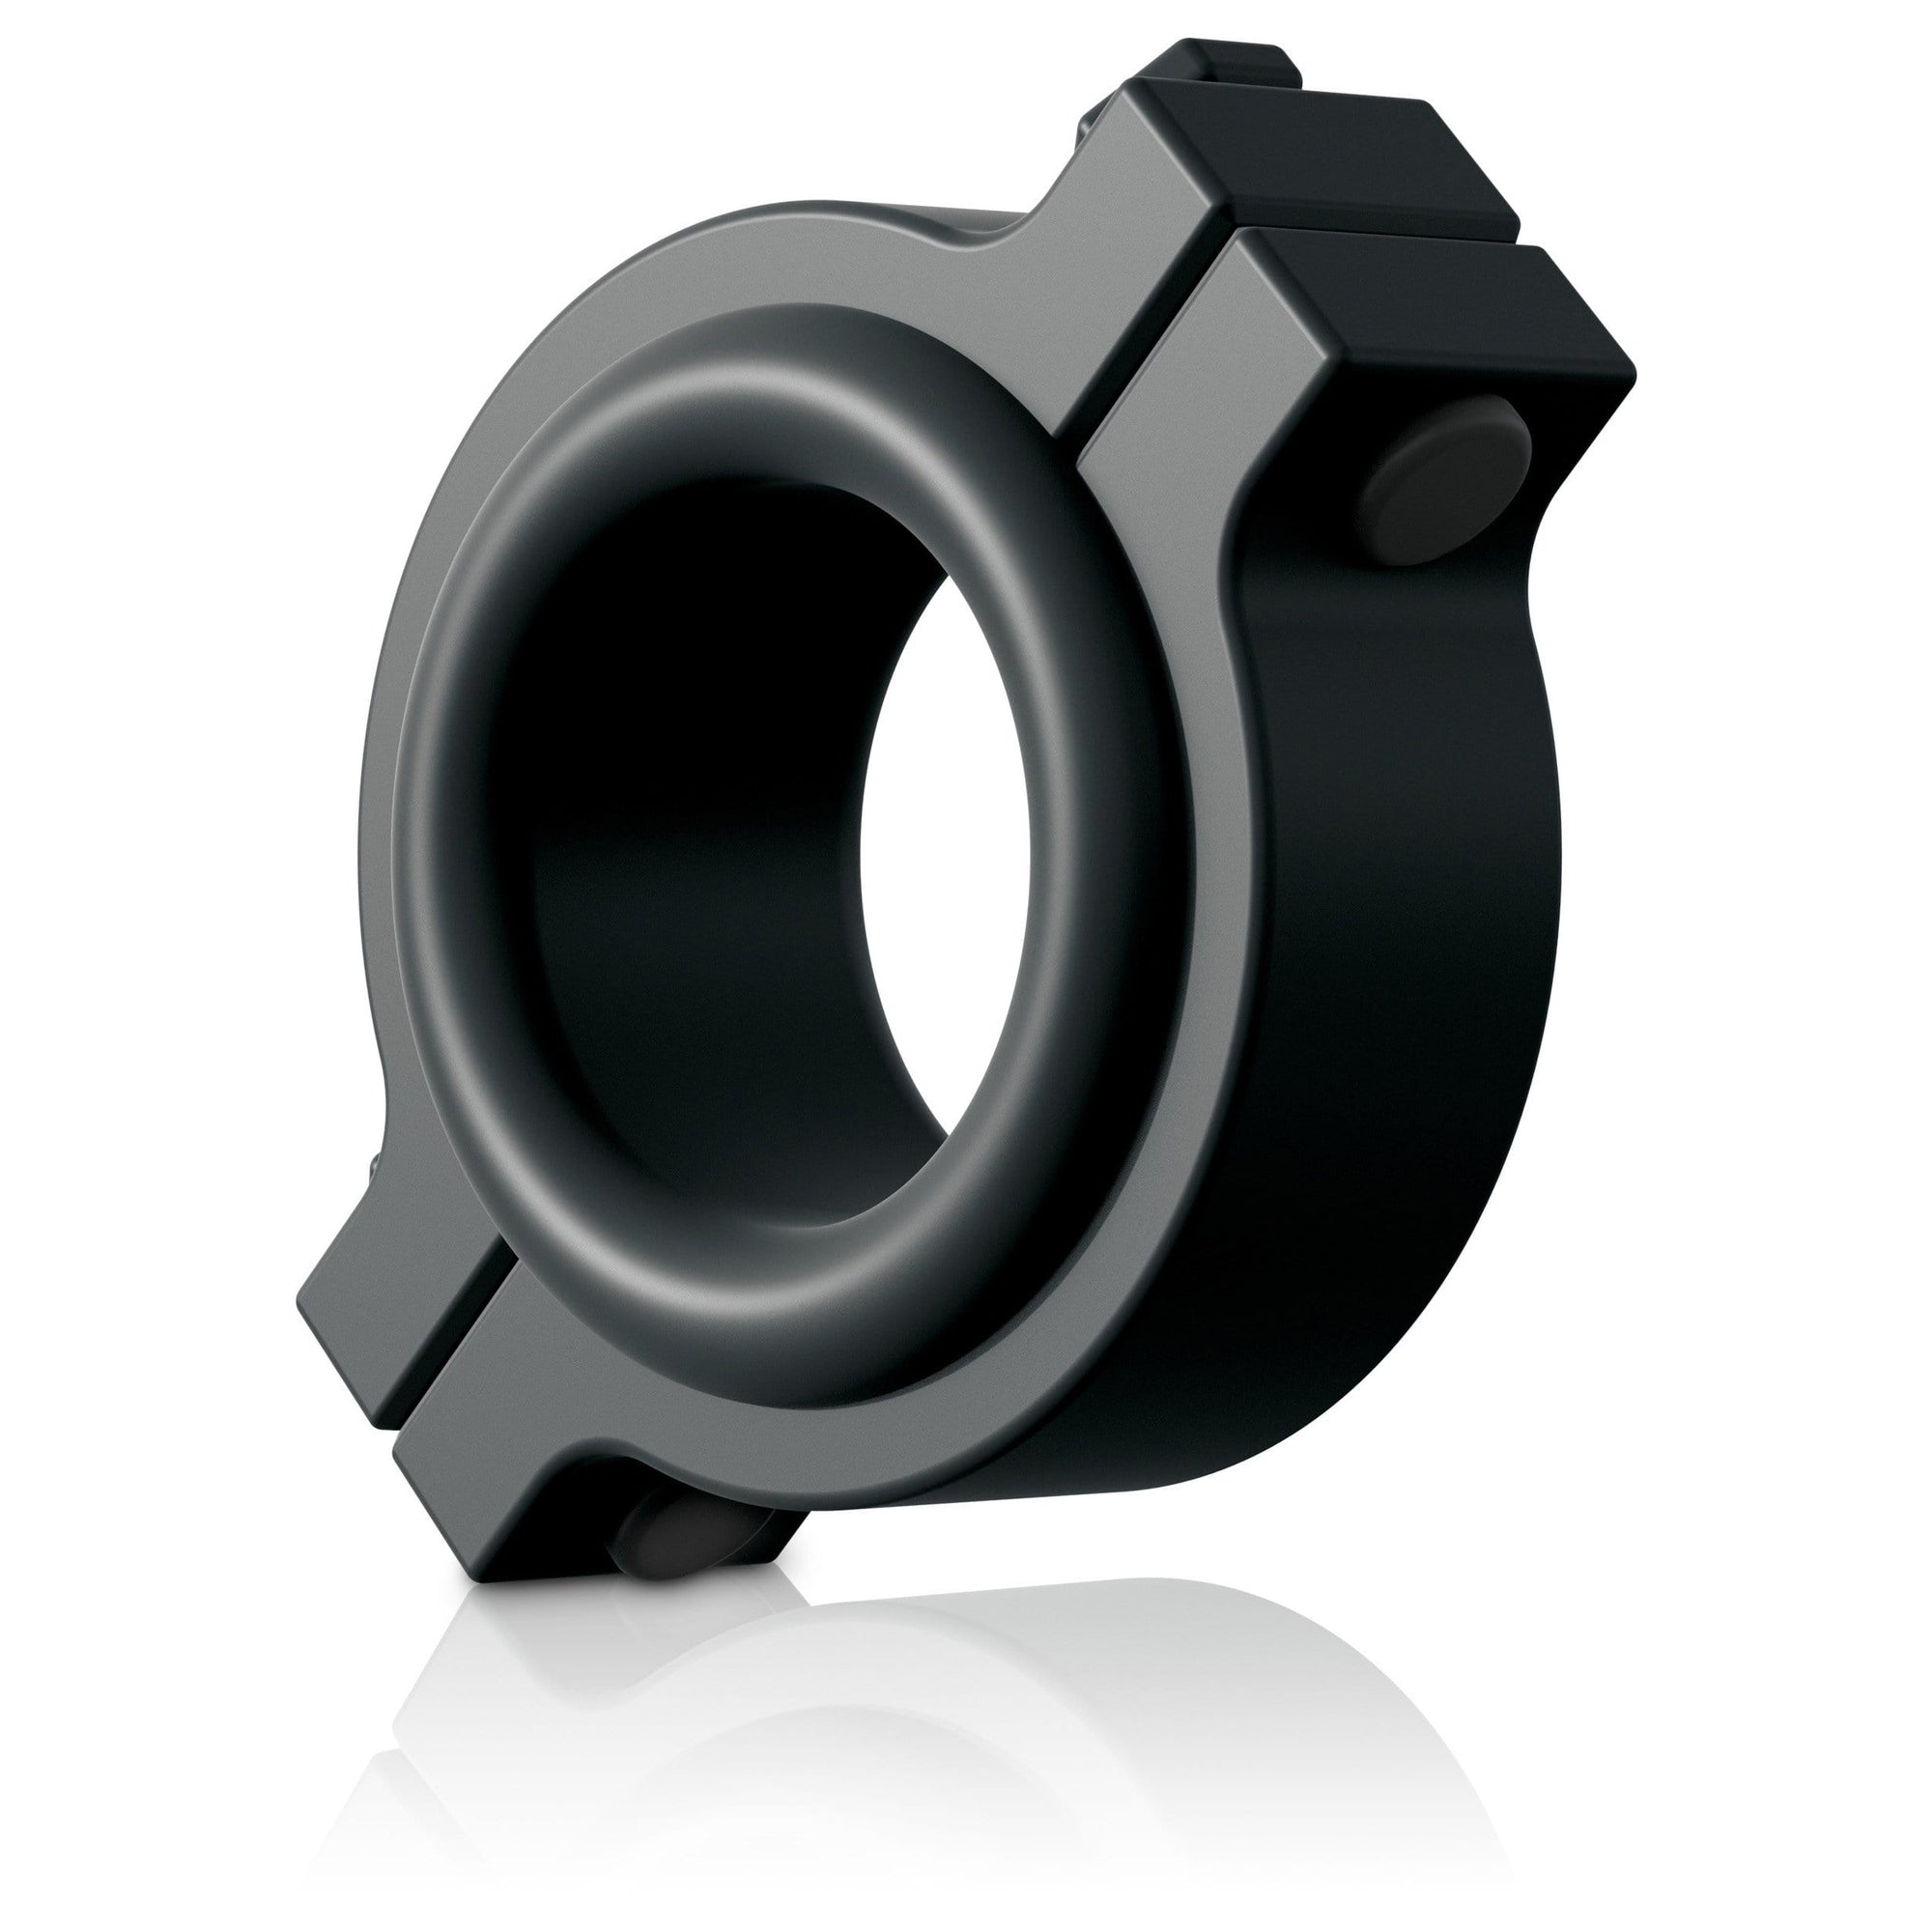 Sir Richards - Control Pipe Clamp Silicone Cock Ring (Black) Silicone Cock Ring (Non Vibration) 324160281 CherryAffairs